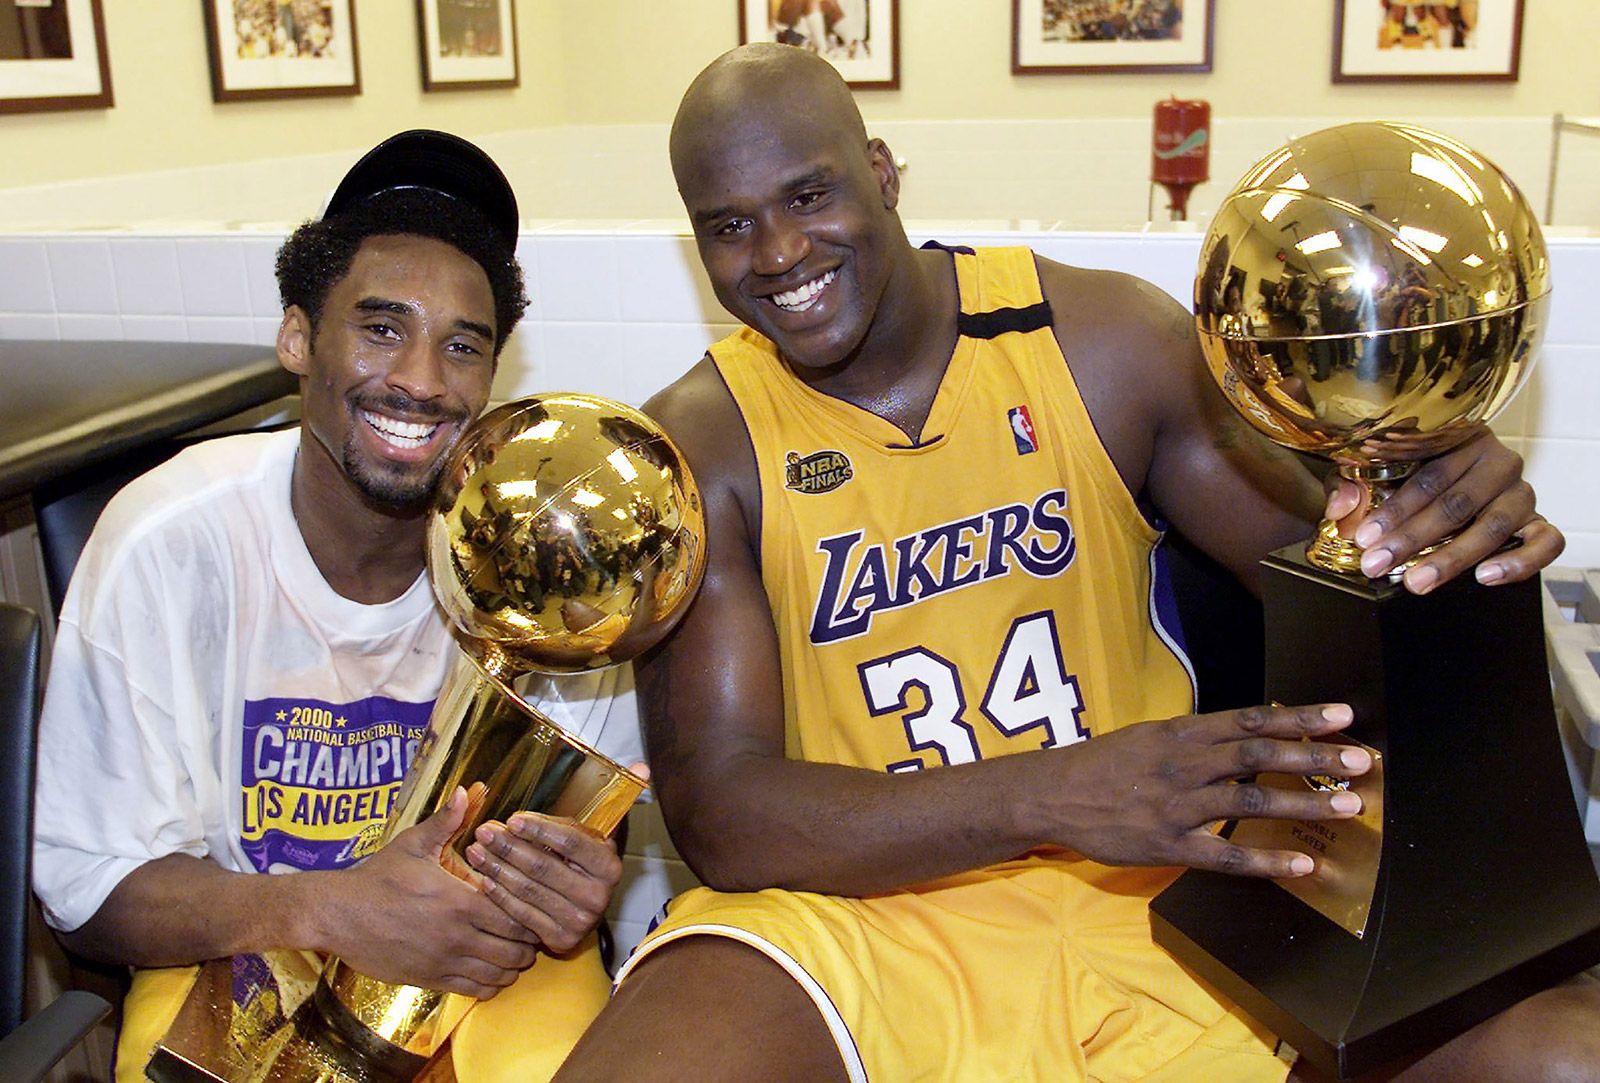 98) Shaquille O'Neal, a longtime Lakers teammate, calls Bryant's